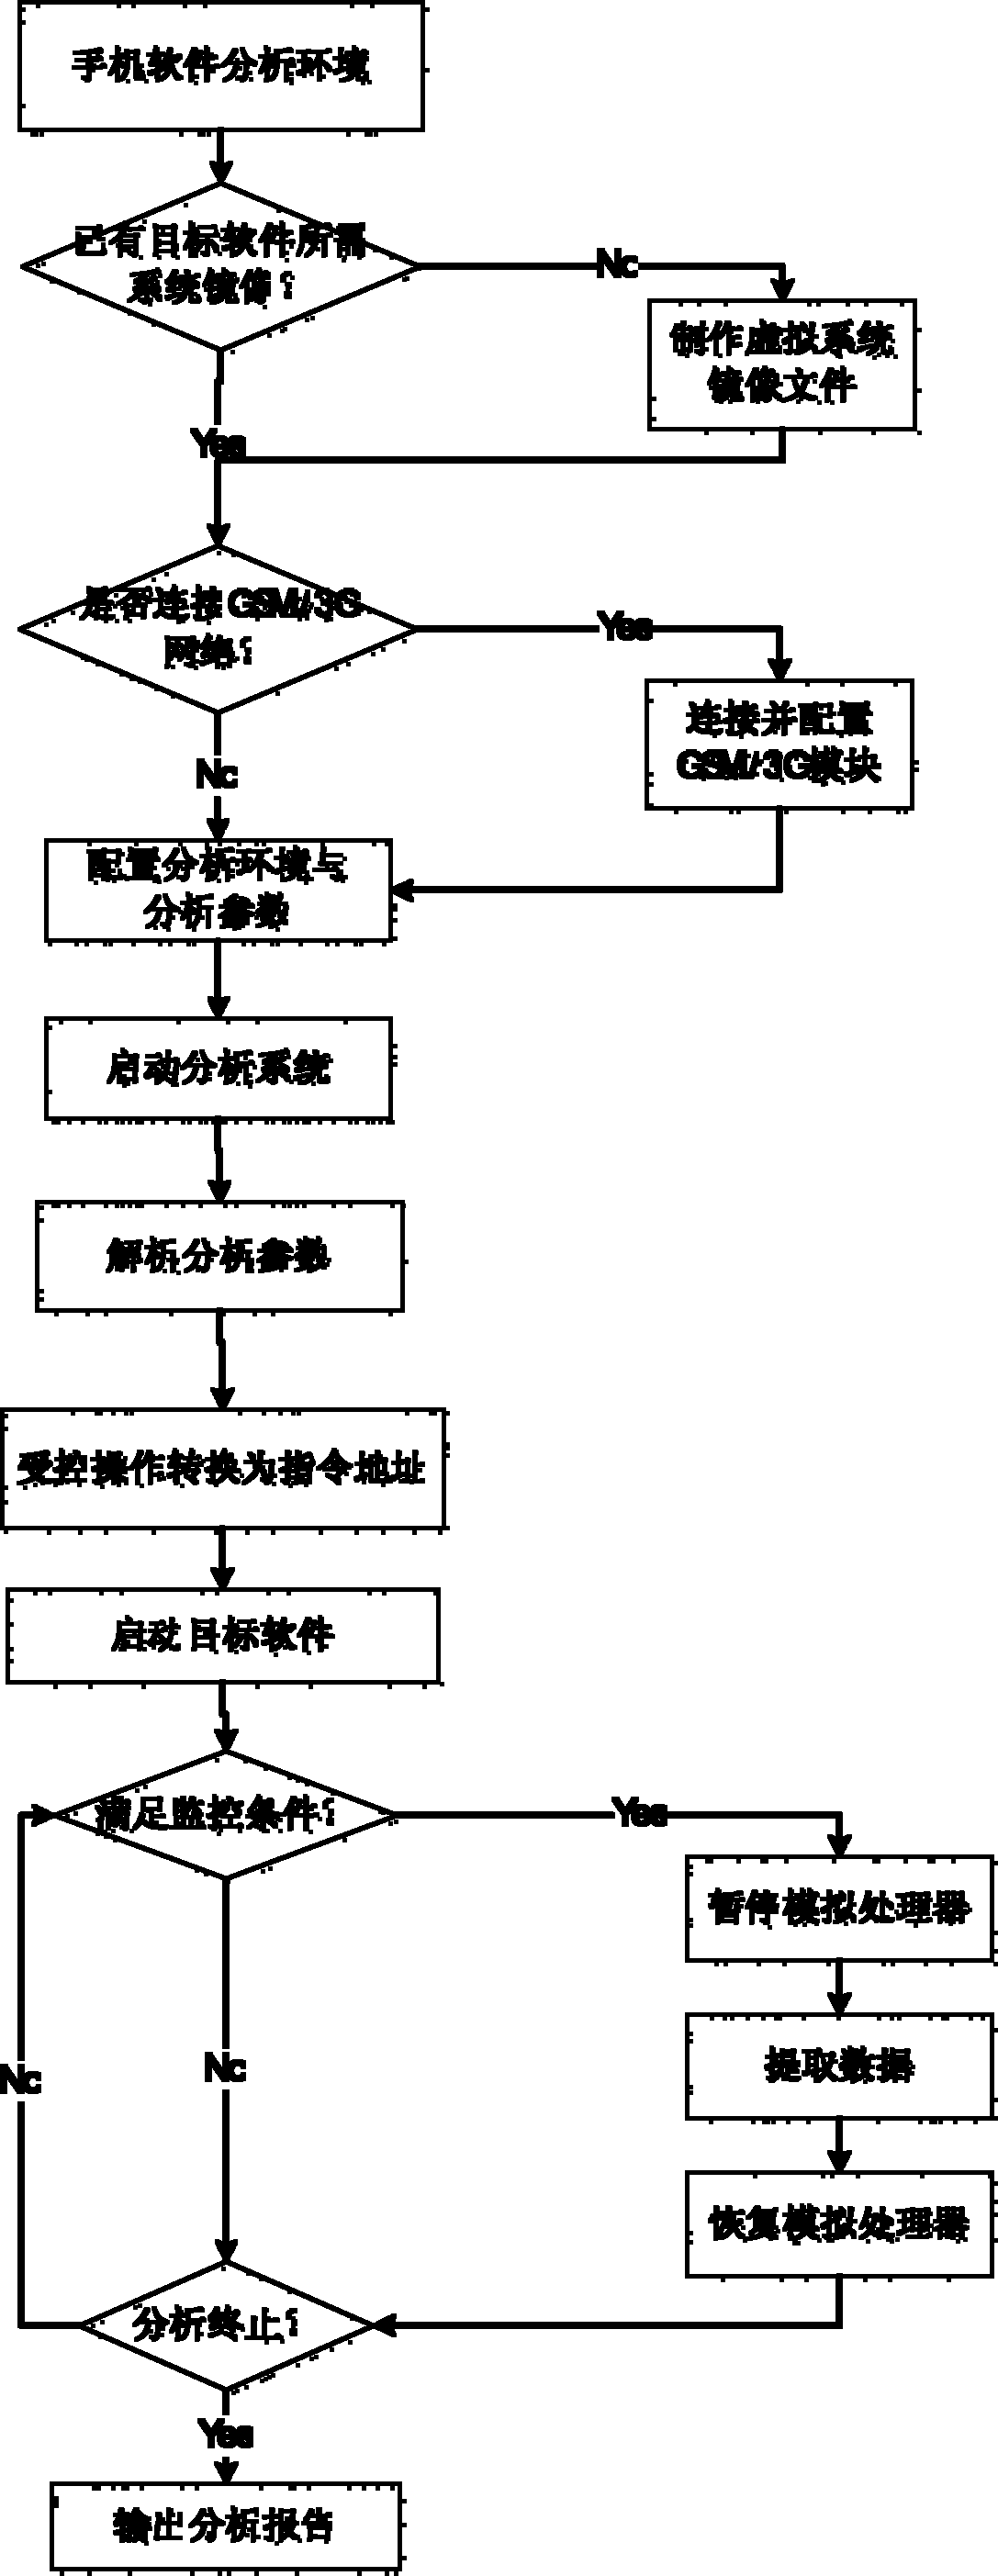 Method and system for extracting behavioral data of mobile phone software